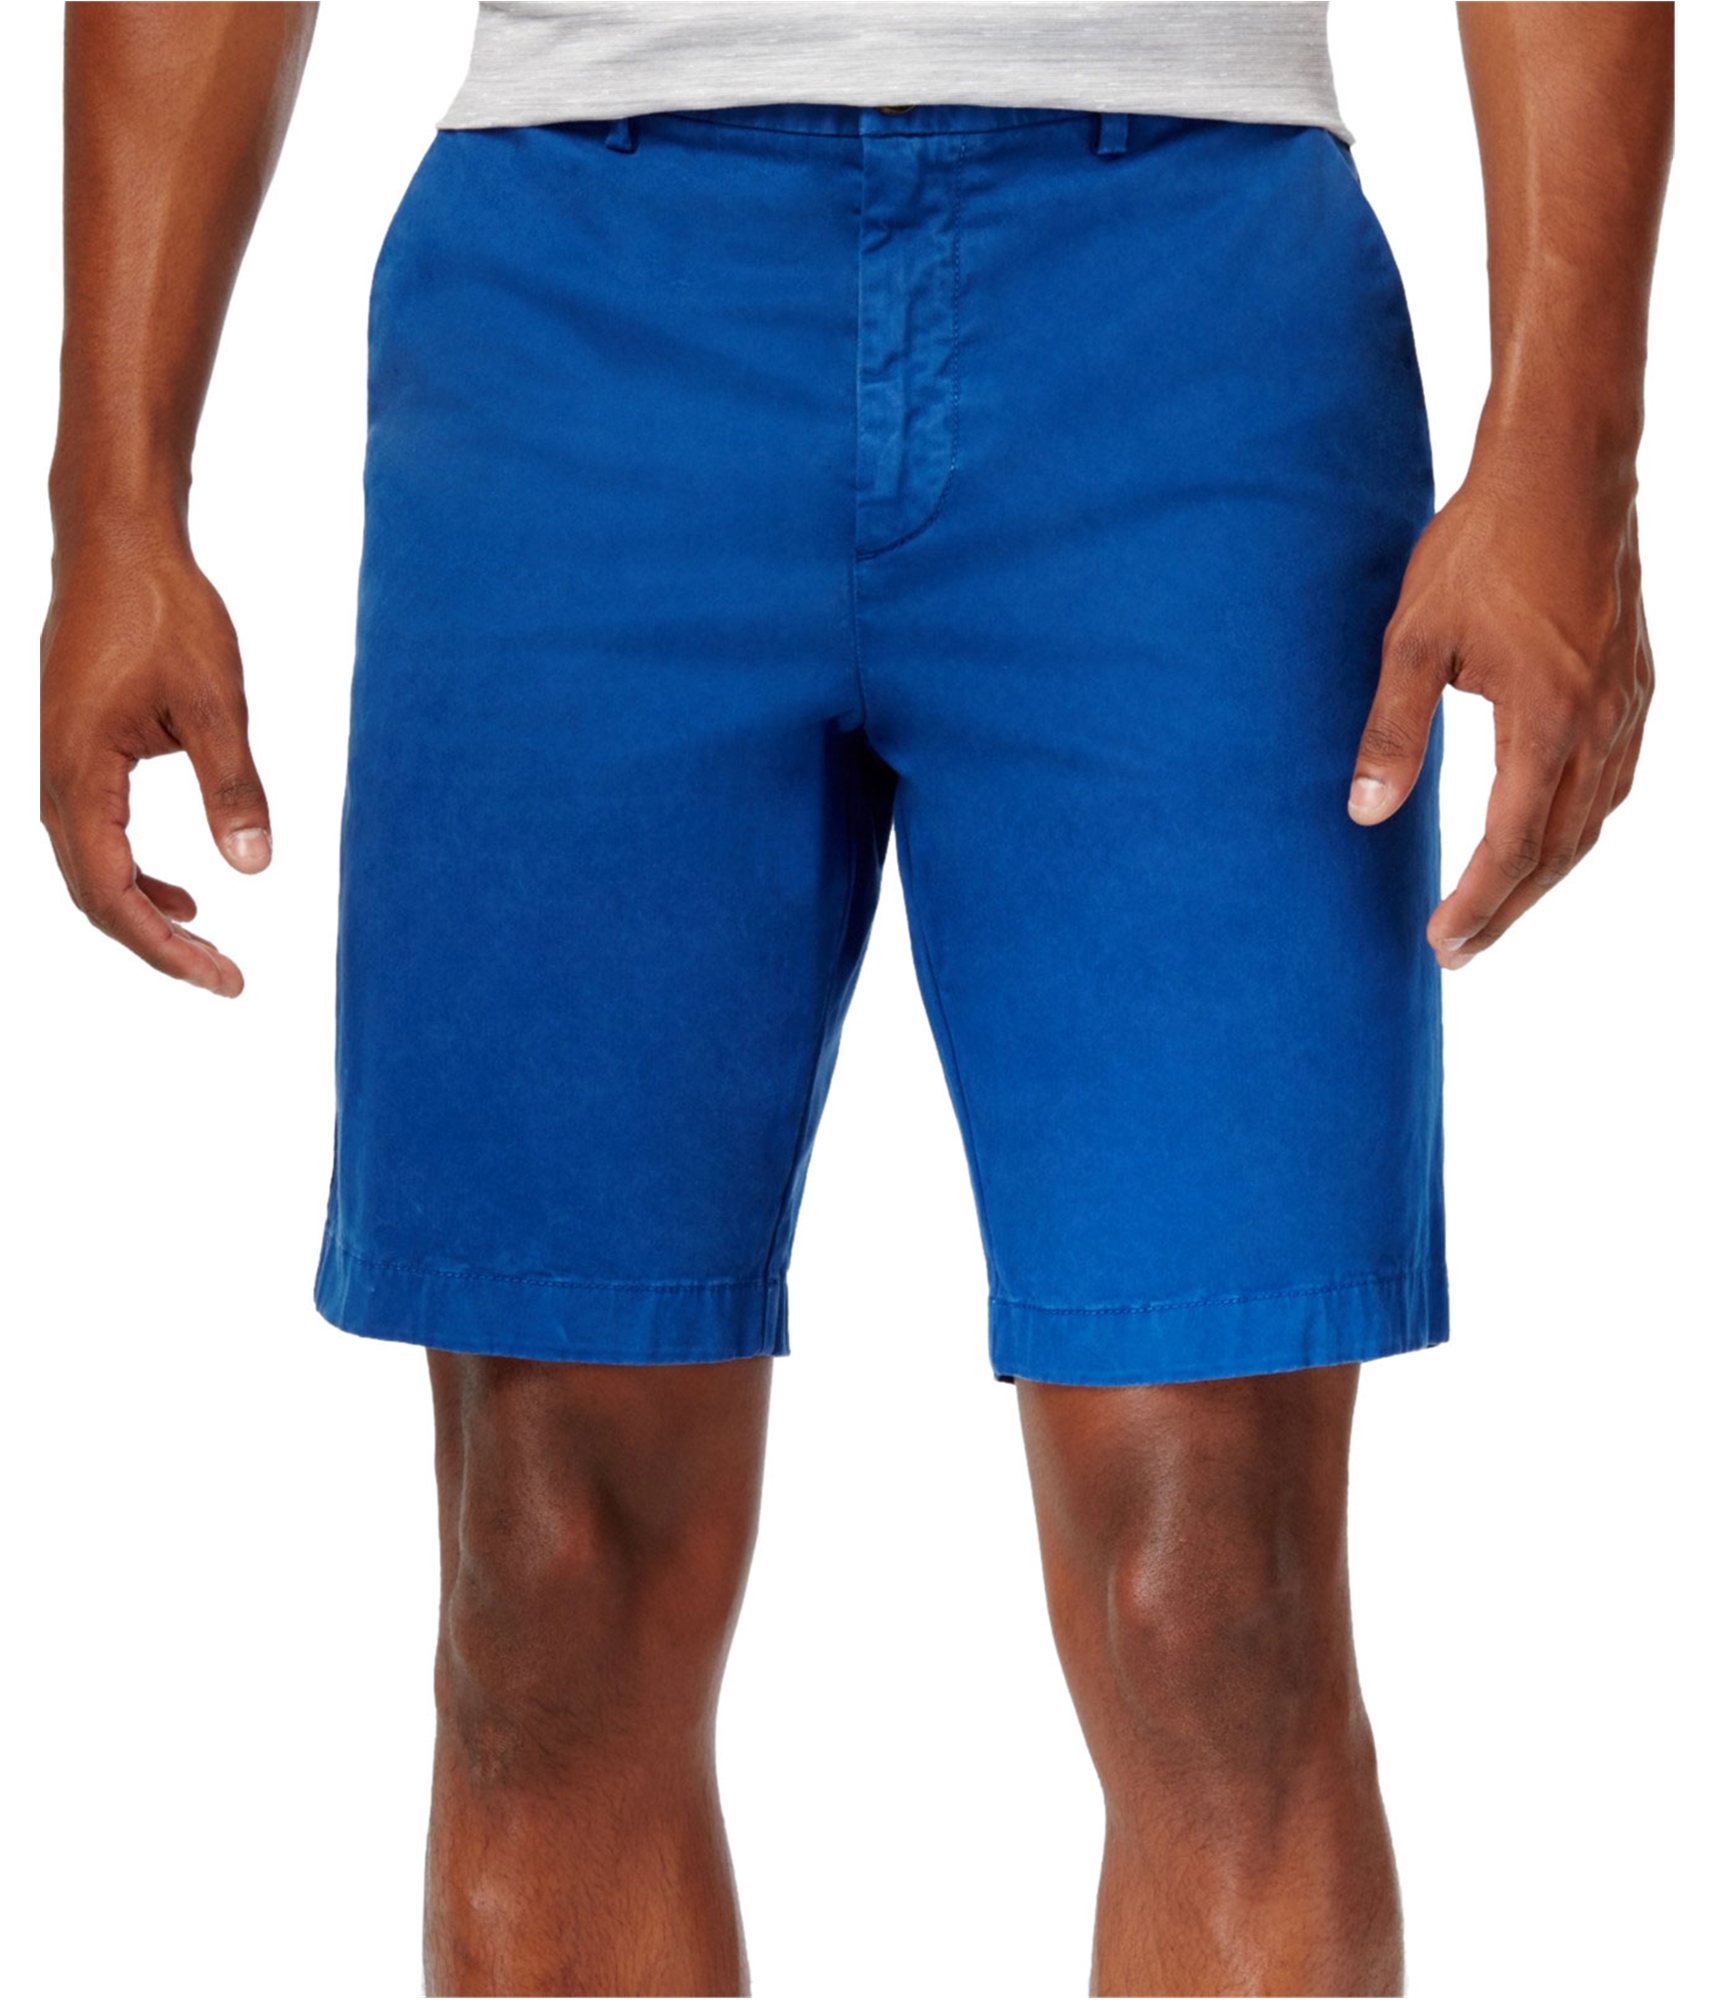 Buy a Michael Kors Mens Spring Stretch Casual Chino Shorts | Tagsweekly